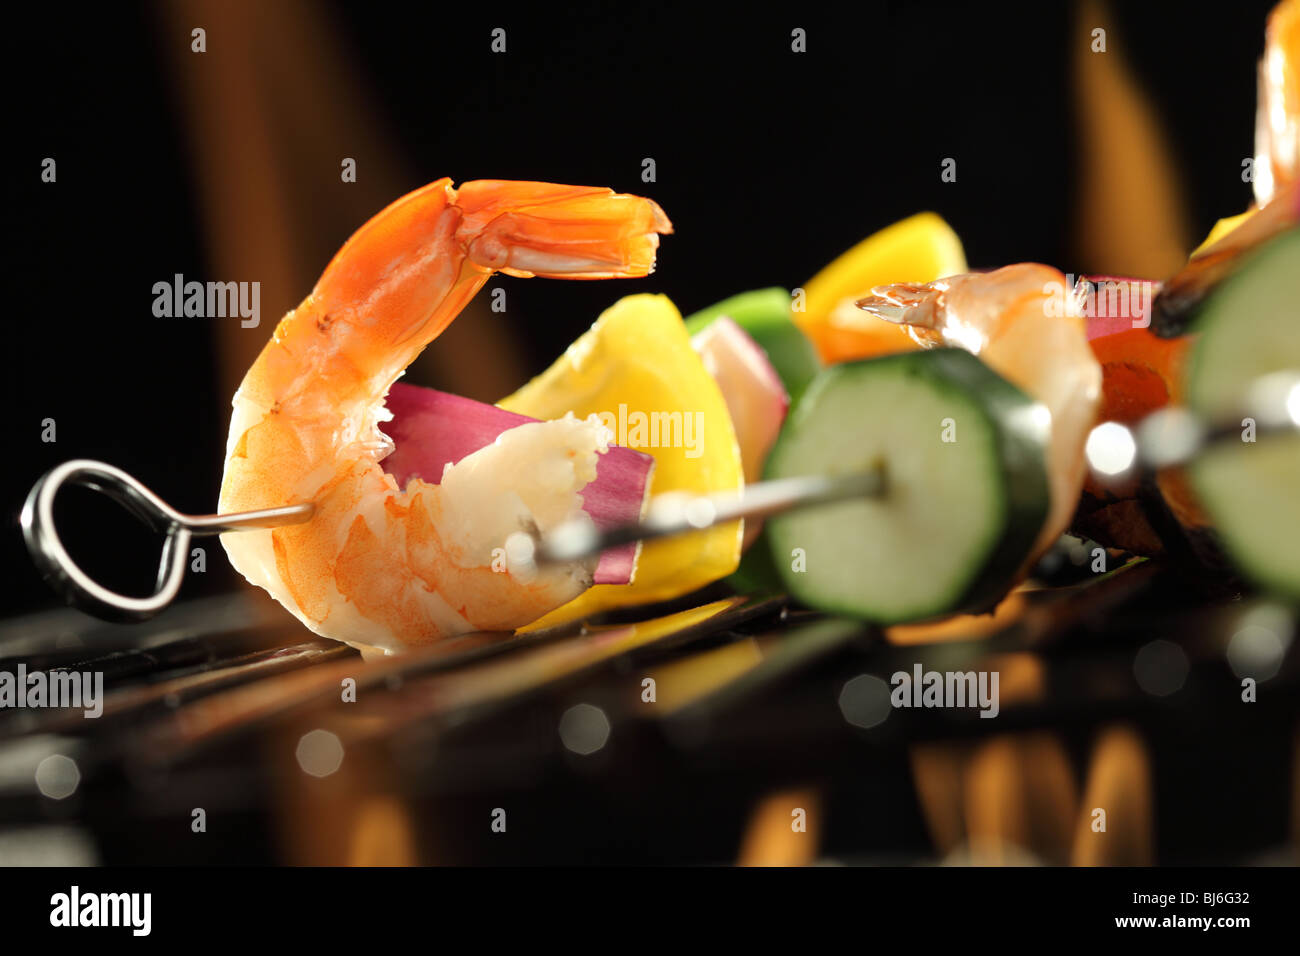 Shrimp and vegetable skewer on grill closeup Stock Photo